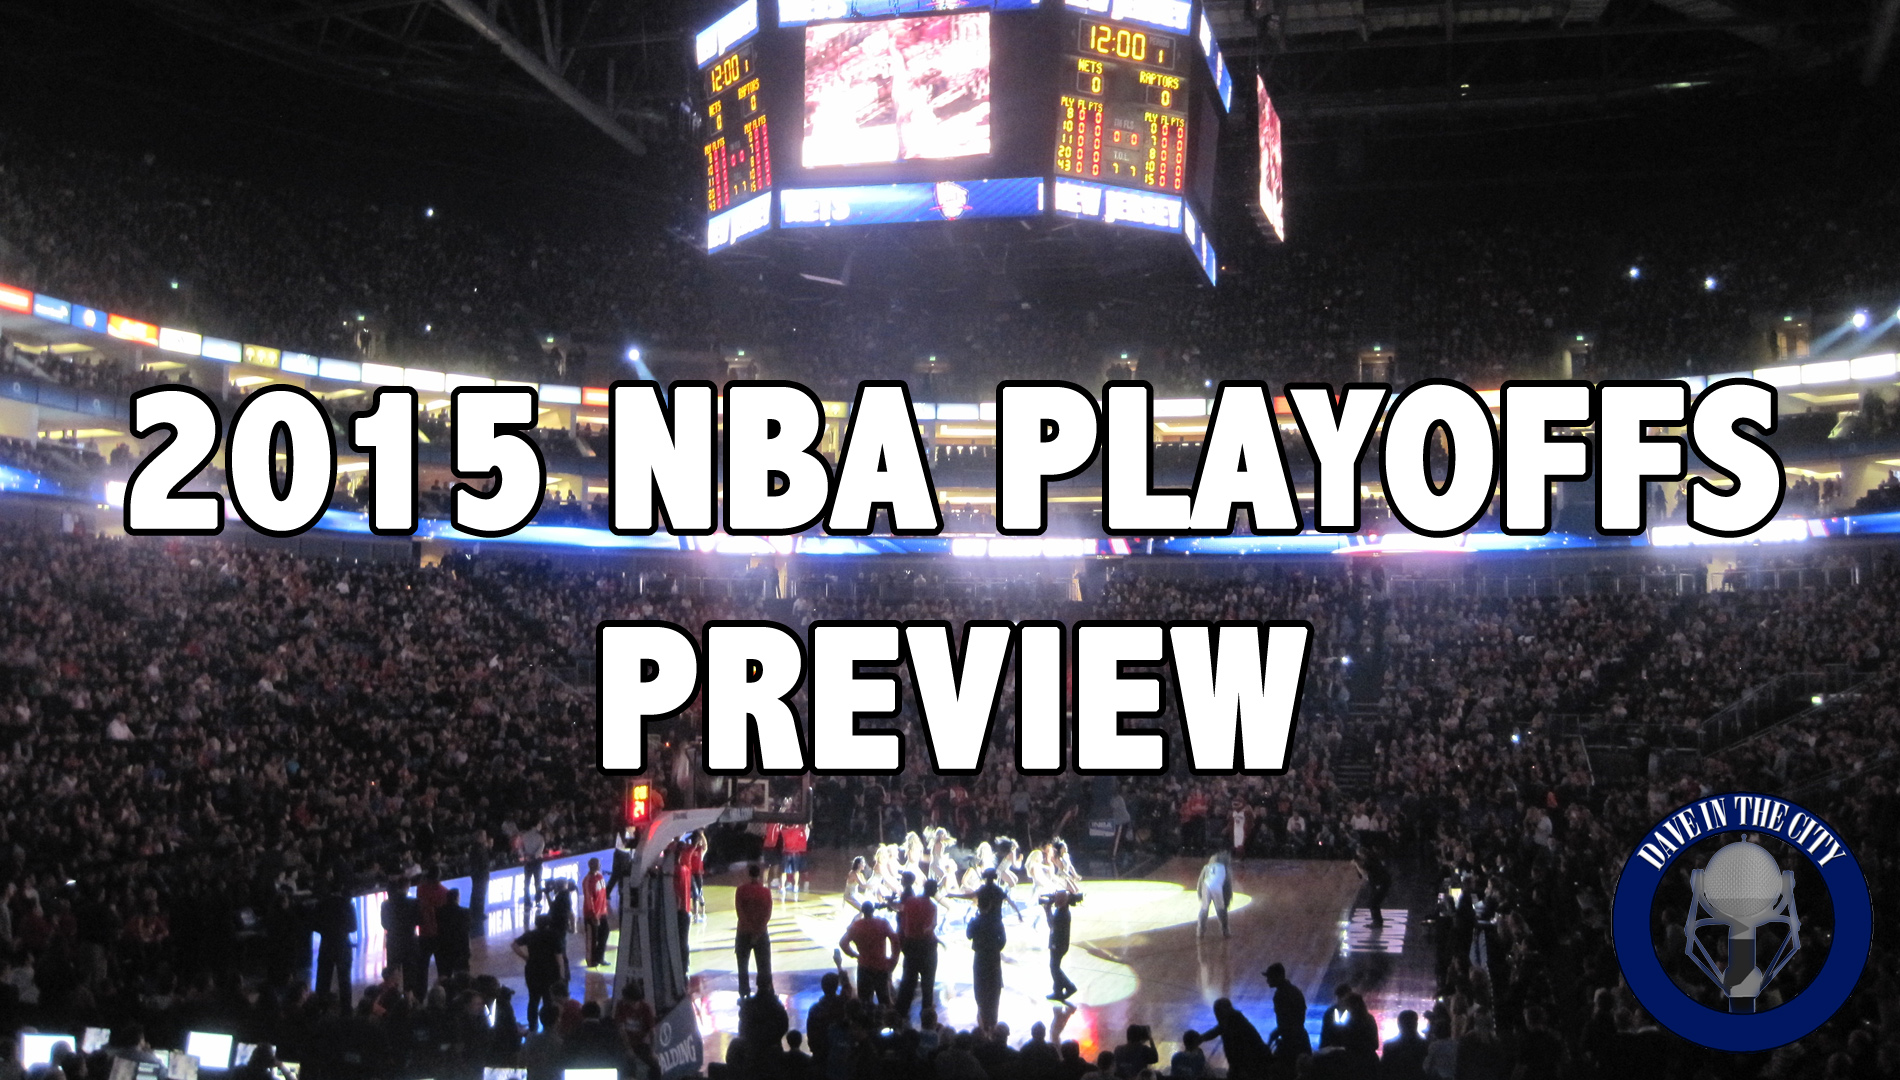 2015 NBA Playoffs Preview & Predictions, RQ's, Dave's Dodger Game Trip (04-15-15)